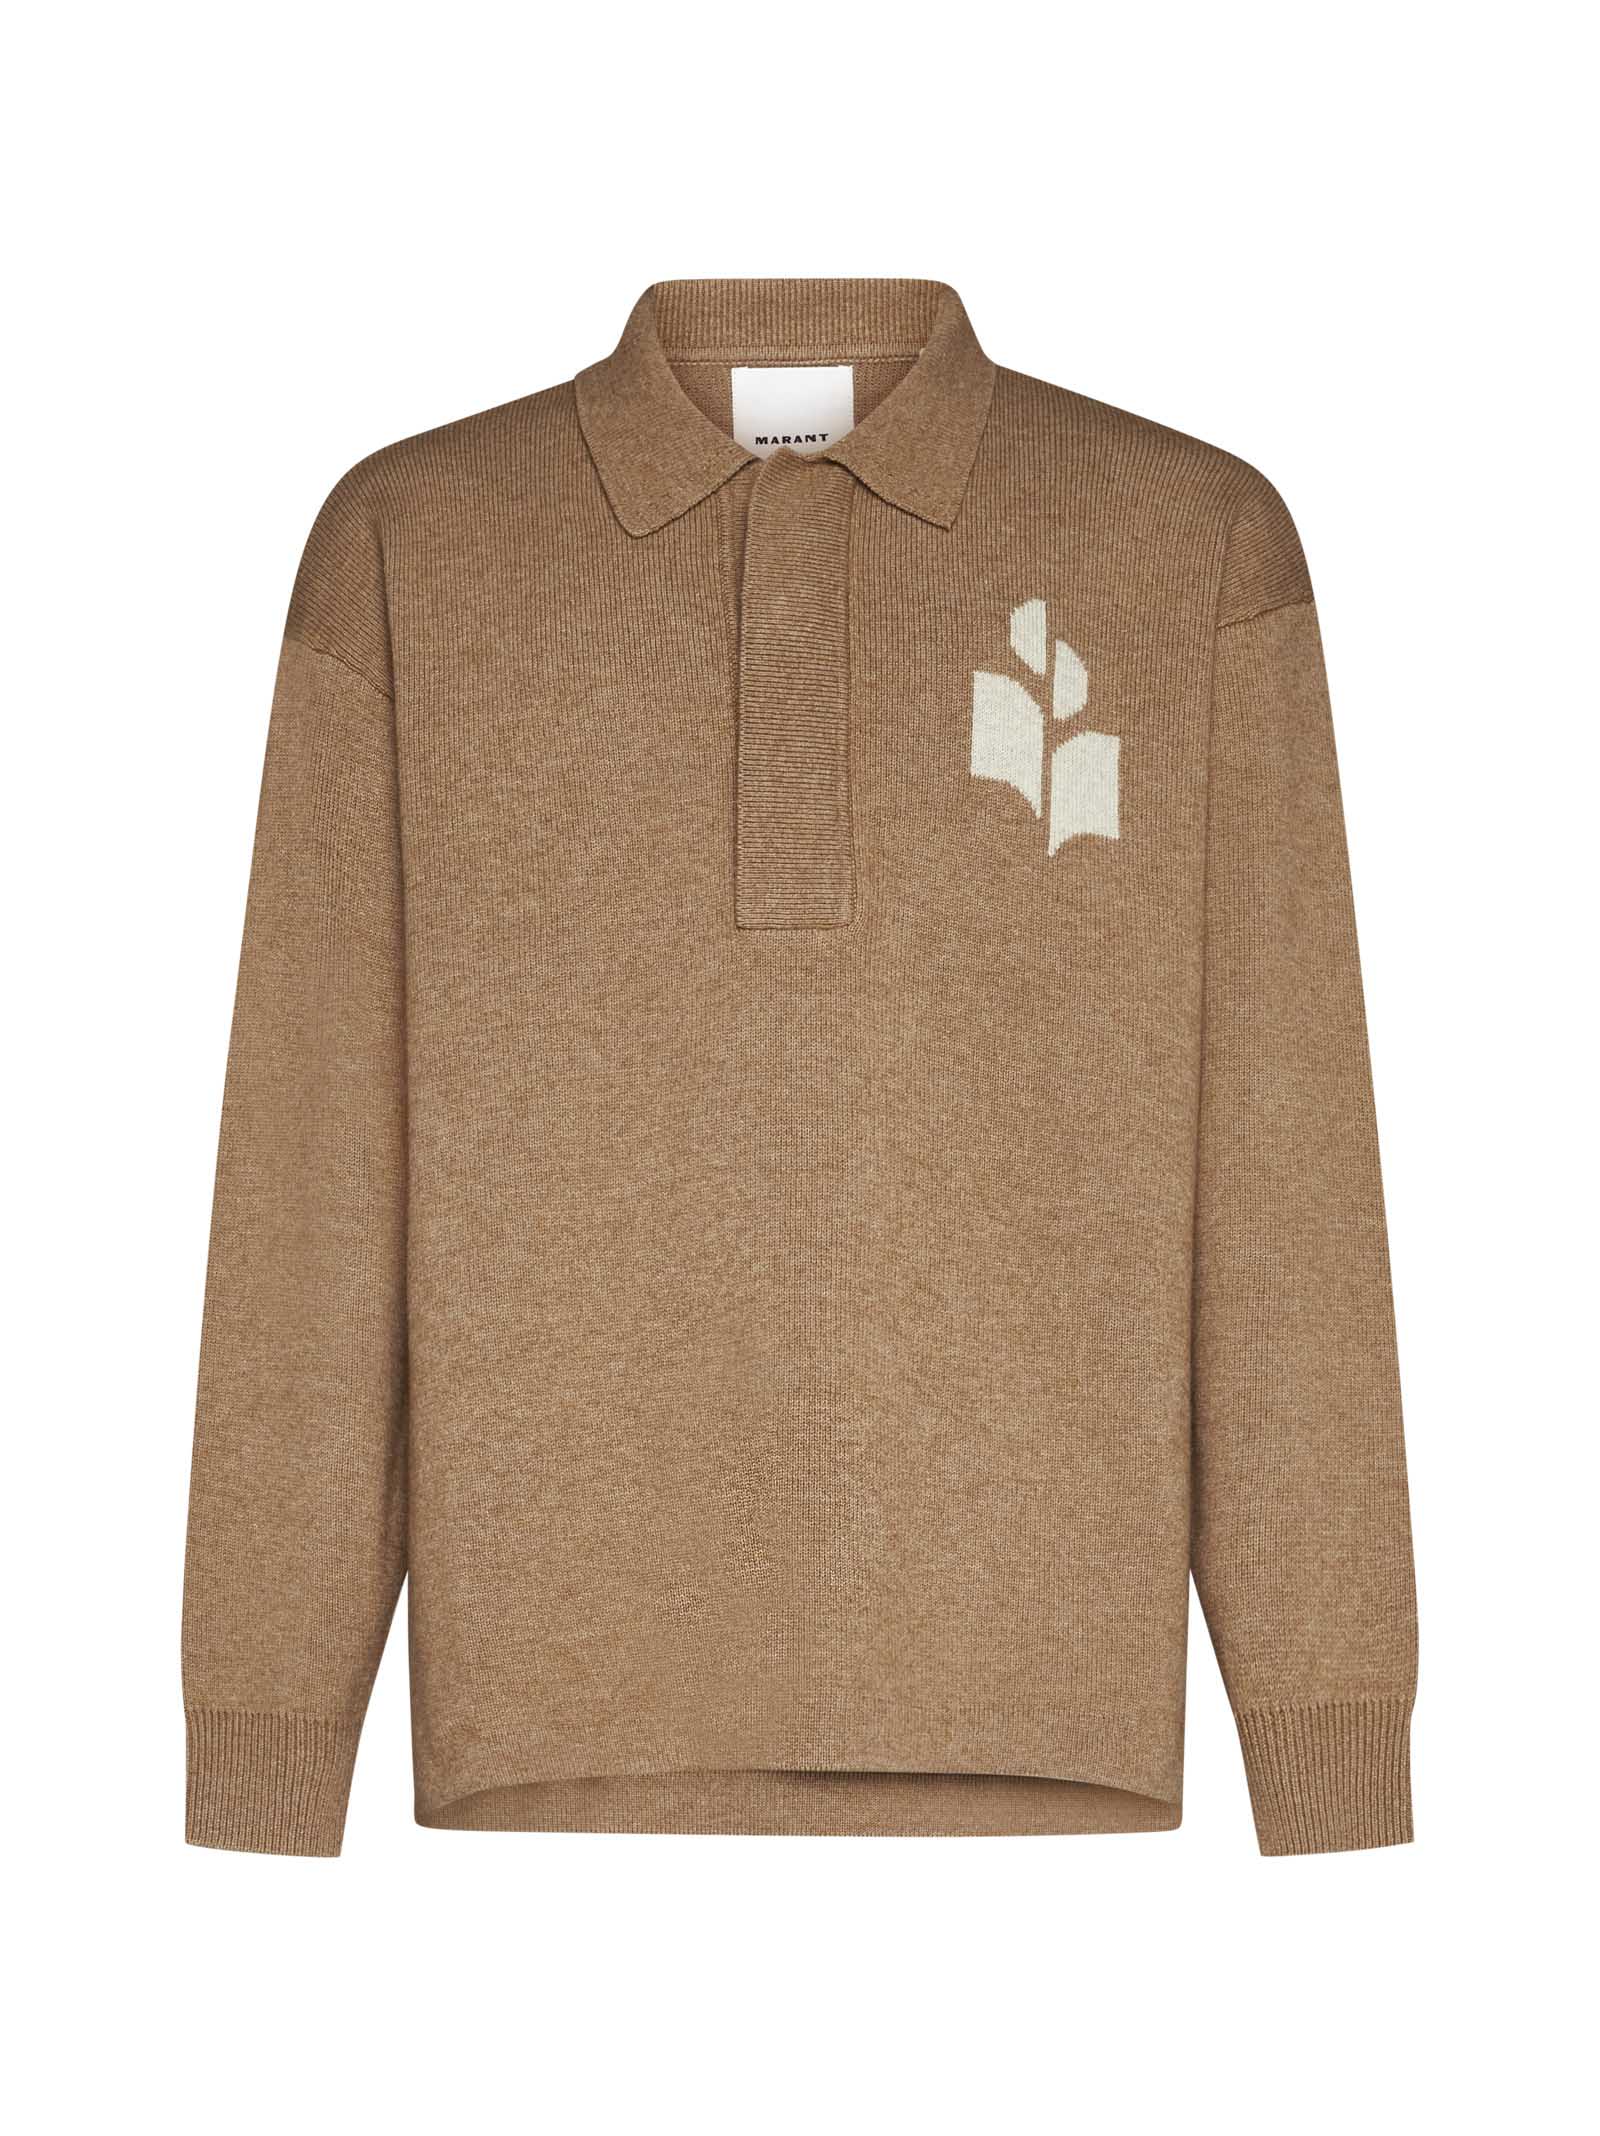 Isabel Marant Sweater In Camel